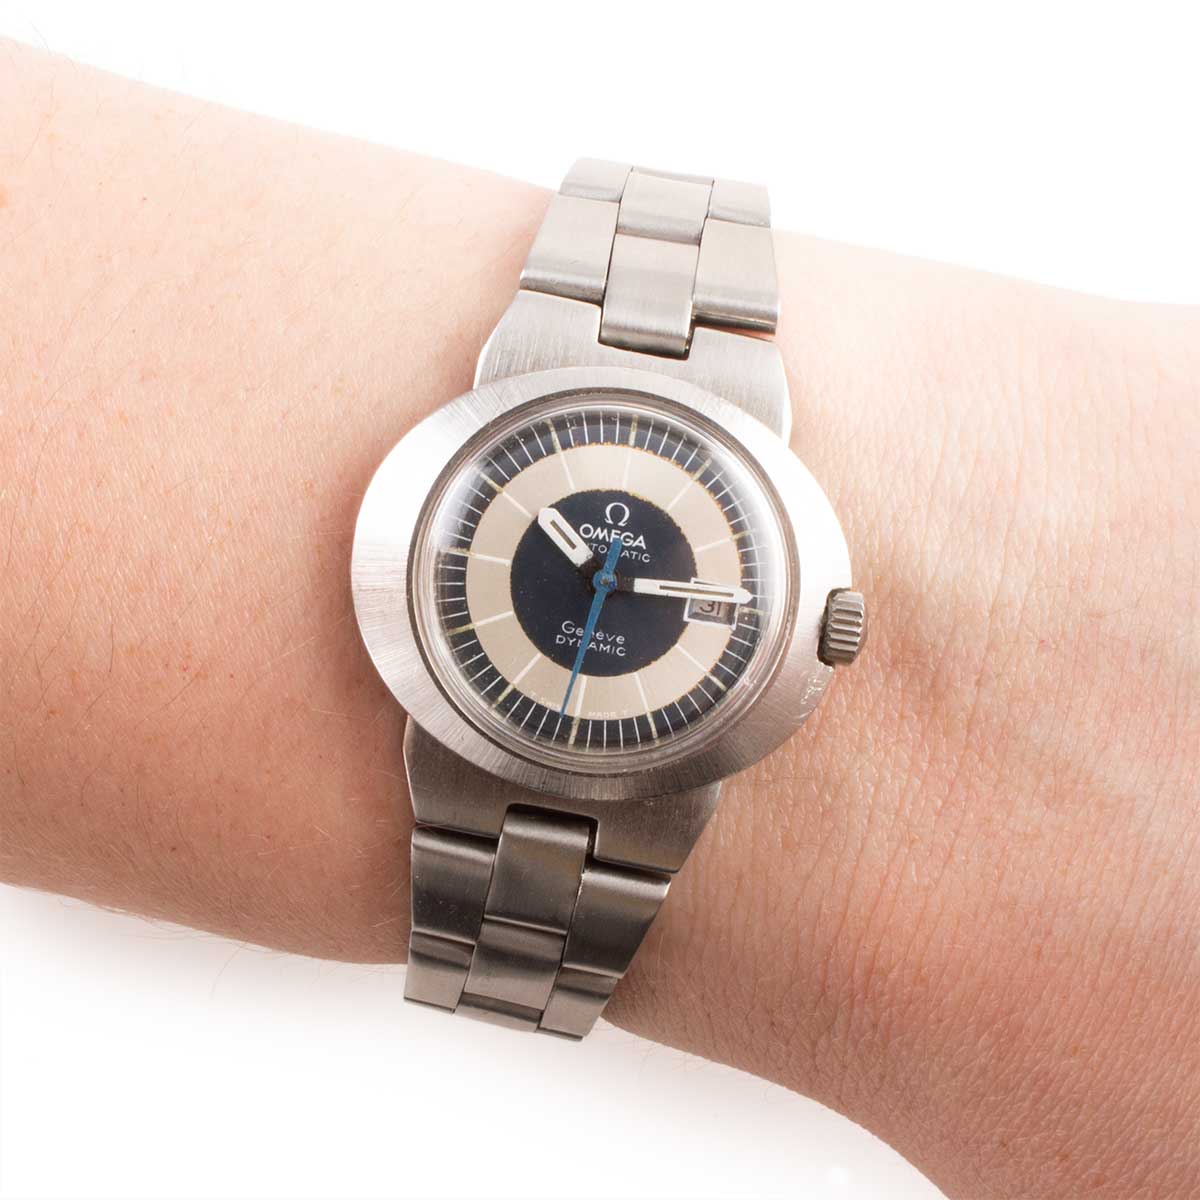 Montre d'occasion - Omega - Dynamic Lady - 1200€